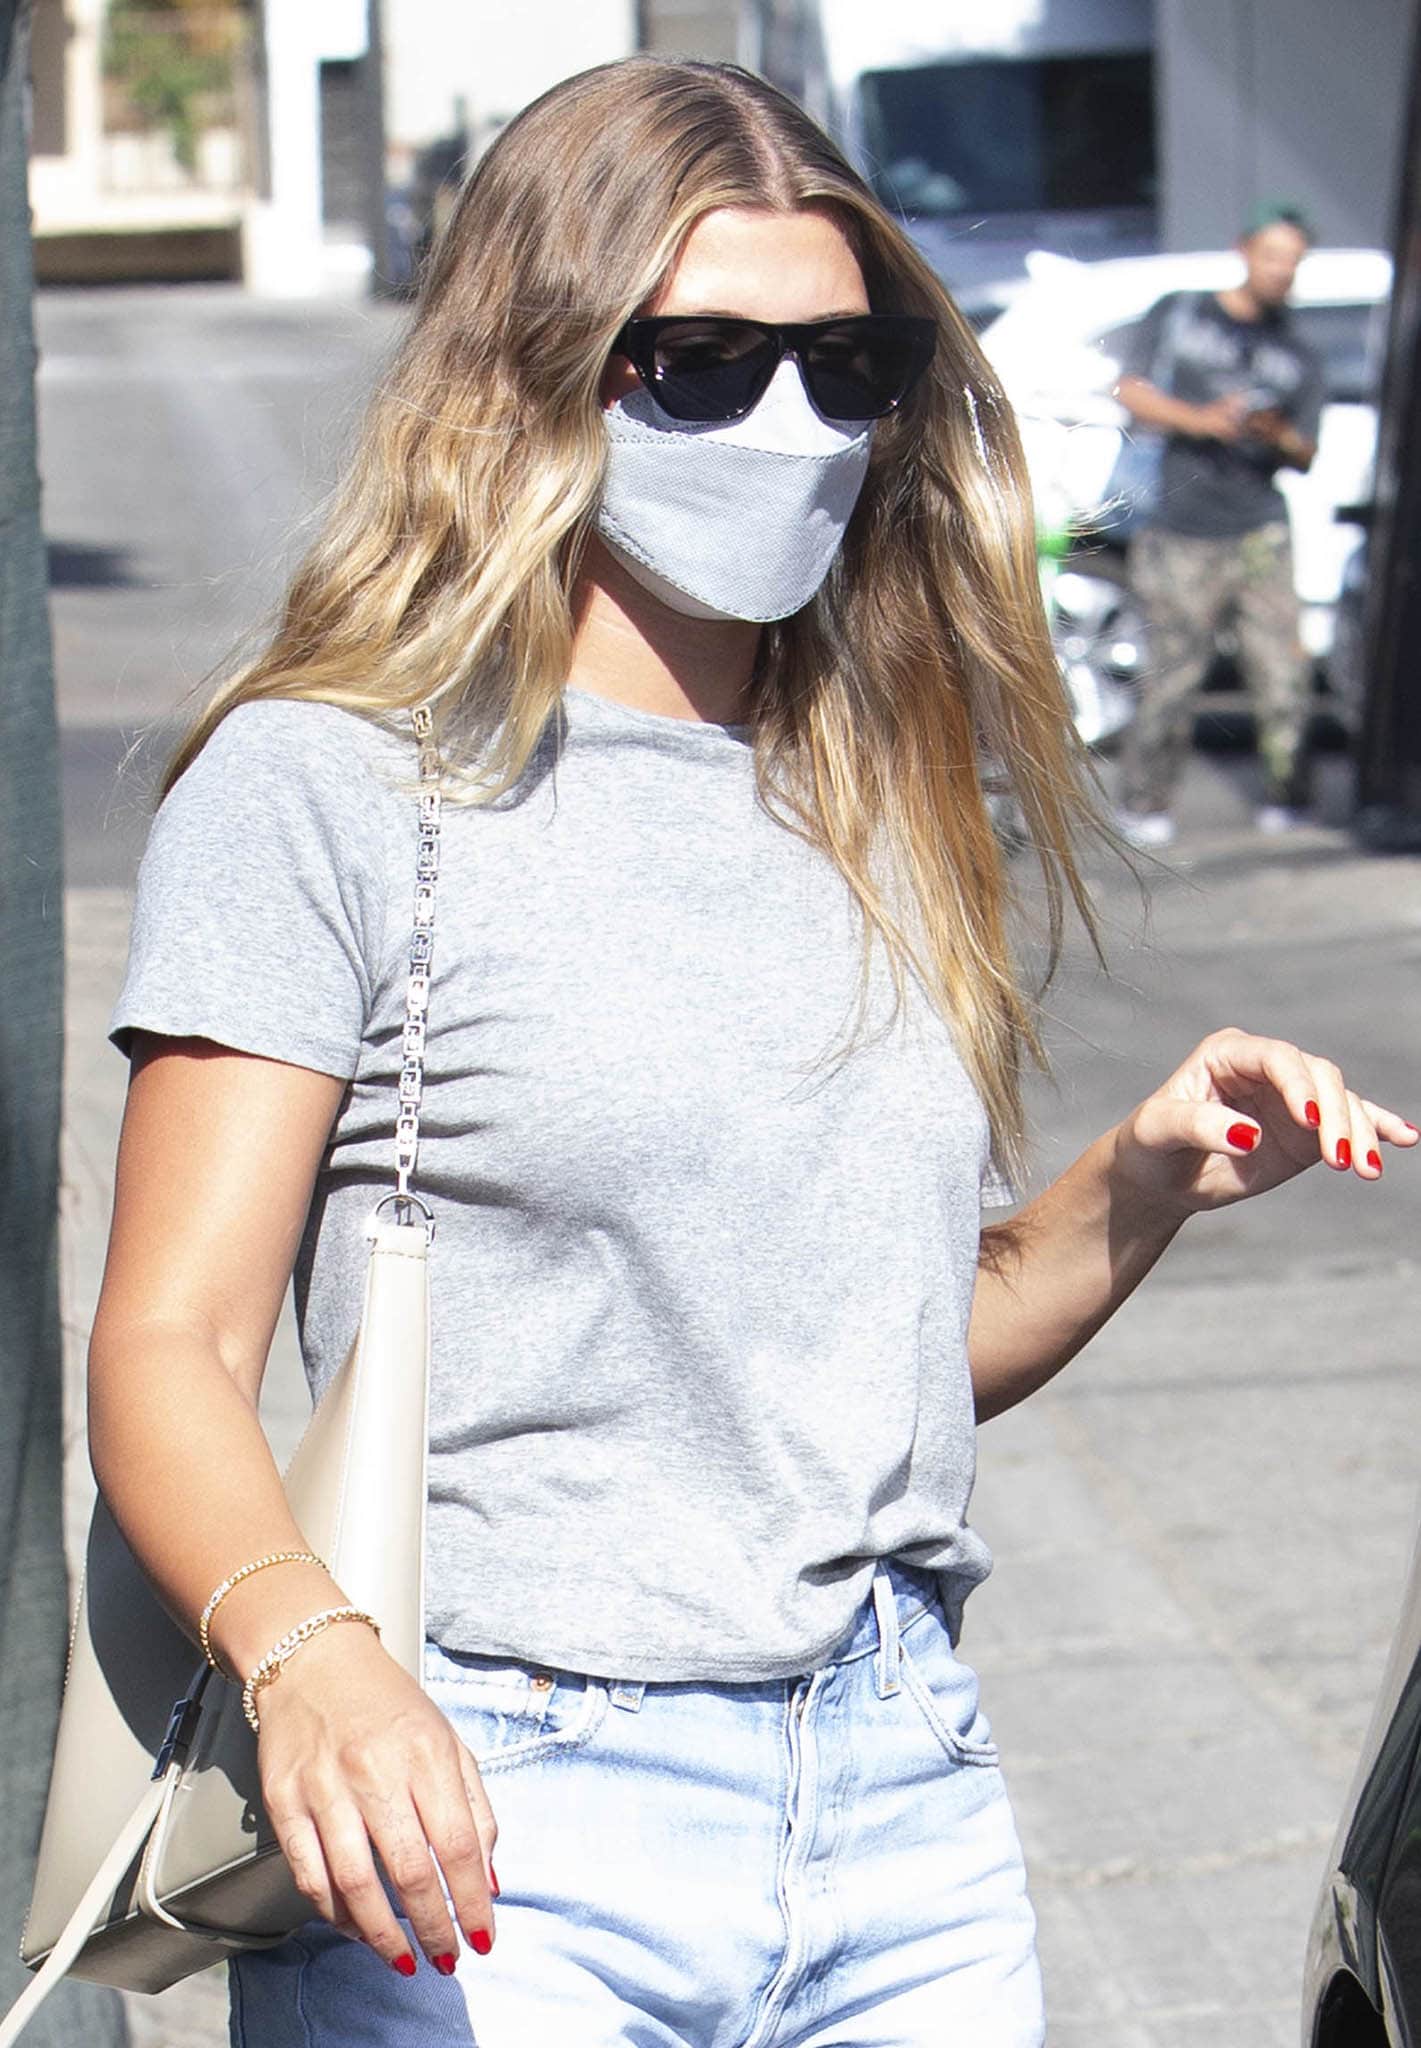 Sofia Richie wears red nail polish as she attempts to go incognito with Dior InsideOut 2 sunglasses and a gray face mask